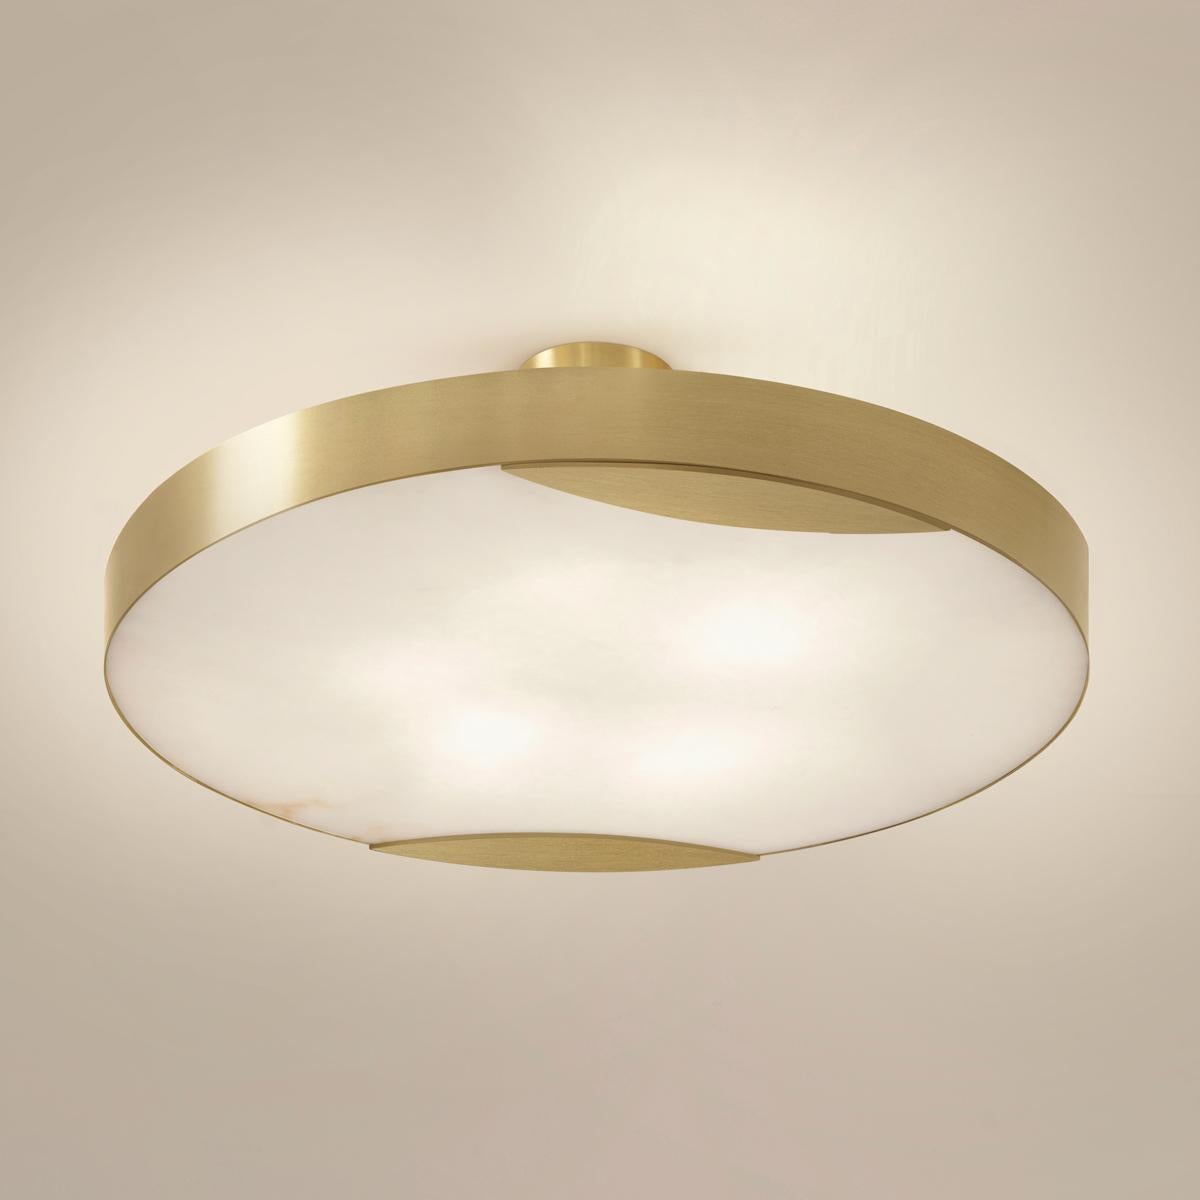 Cloud N.1 Ceiling Light by Gaspare Asaro-Polished Brass Finish For Sale 2